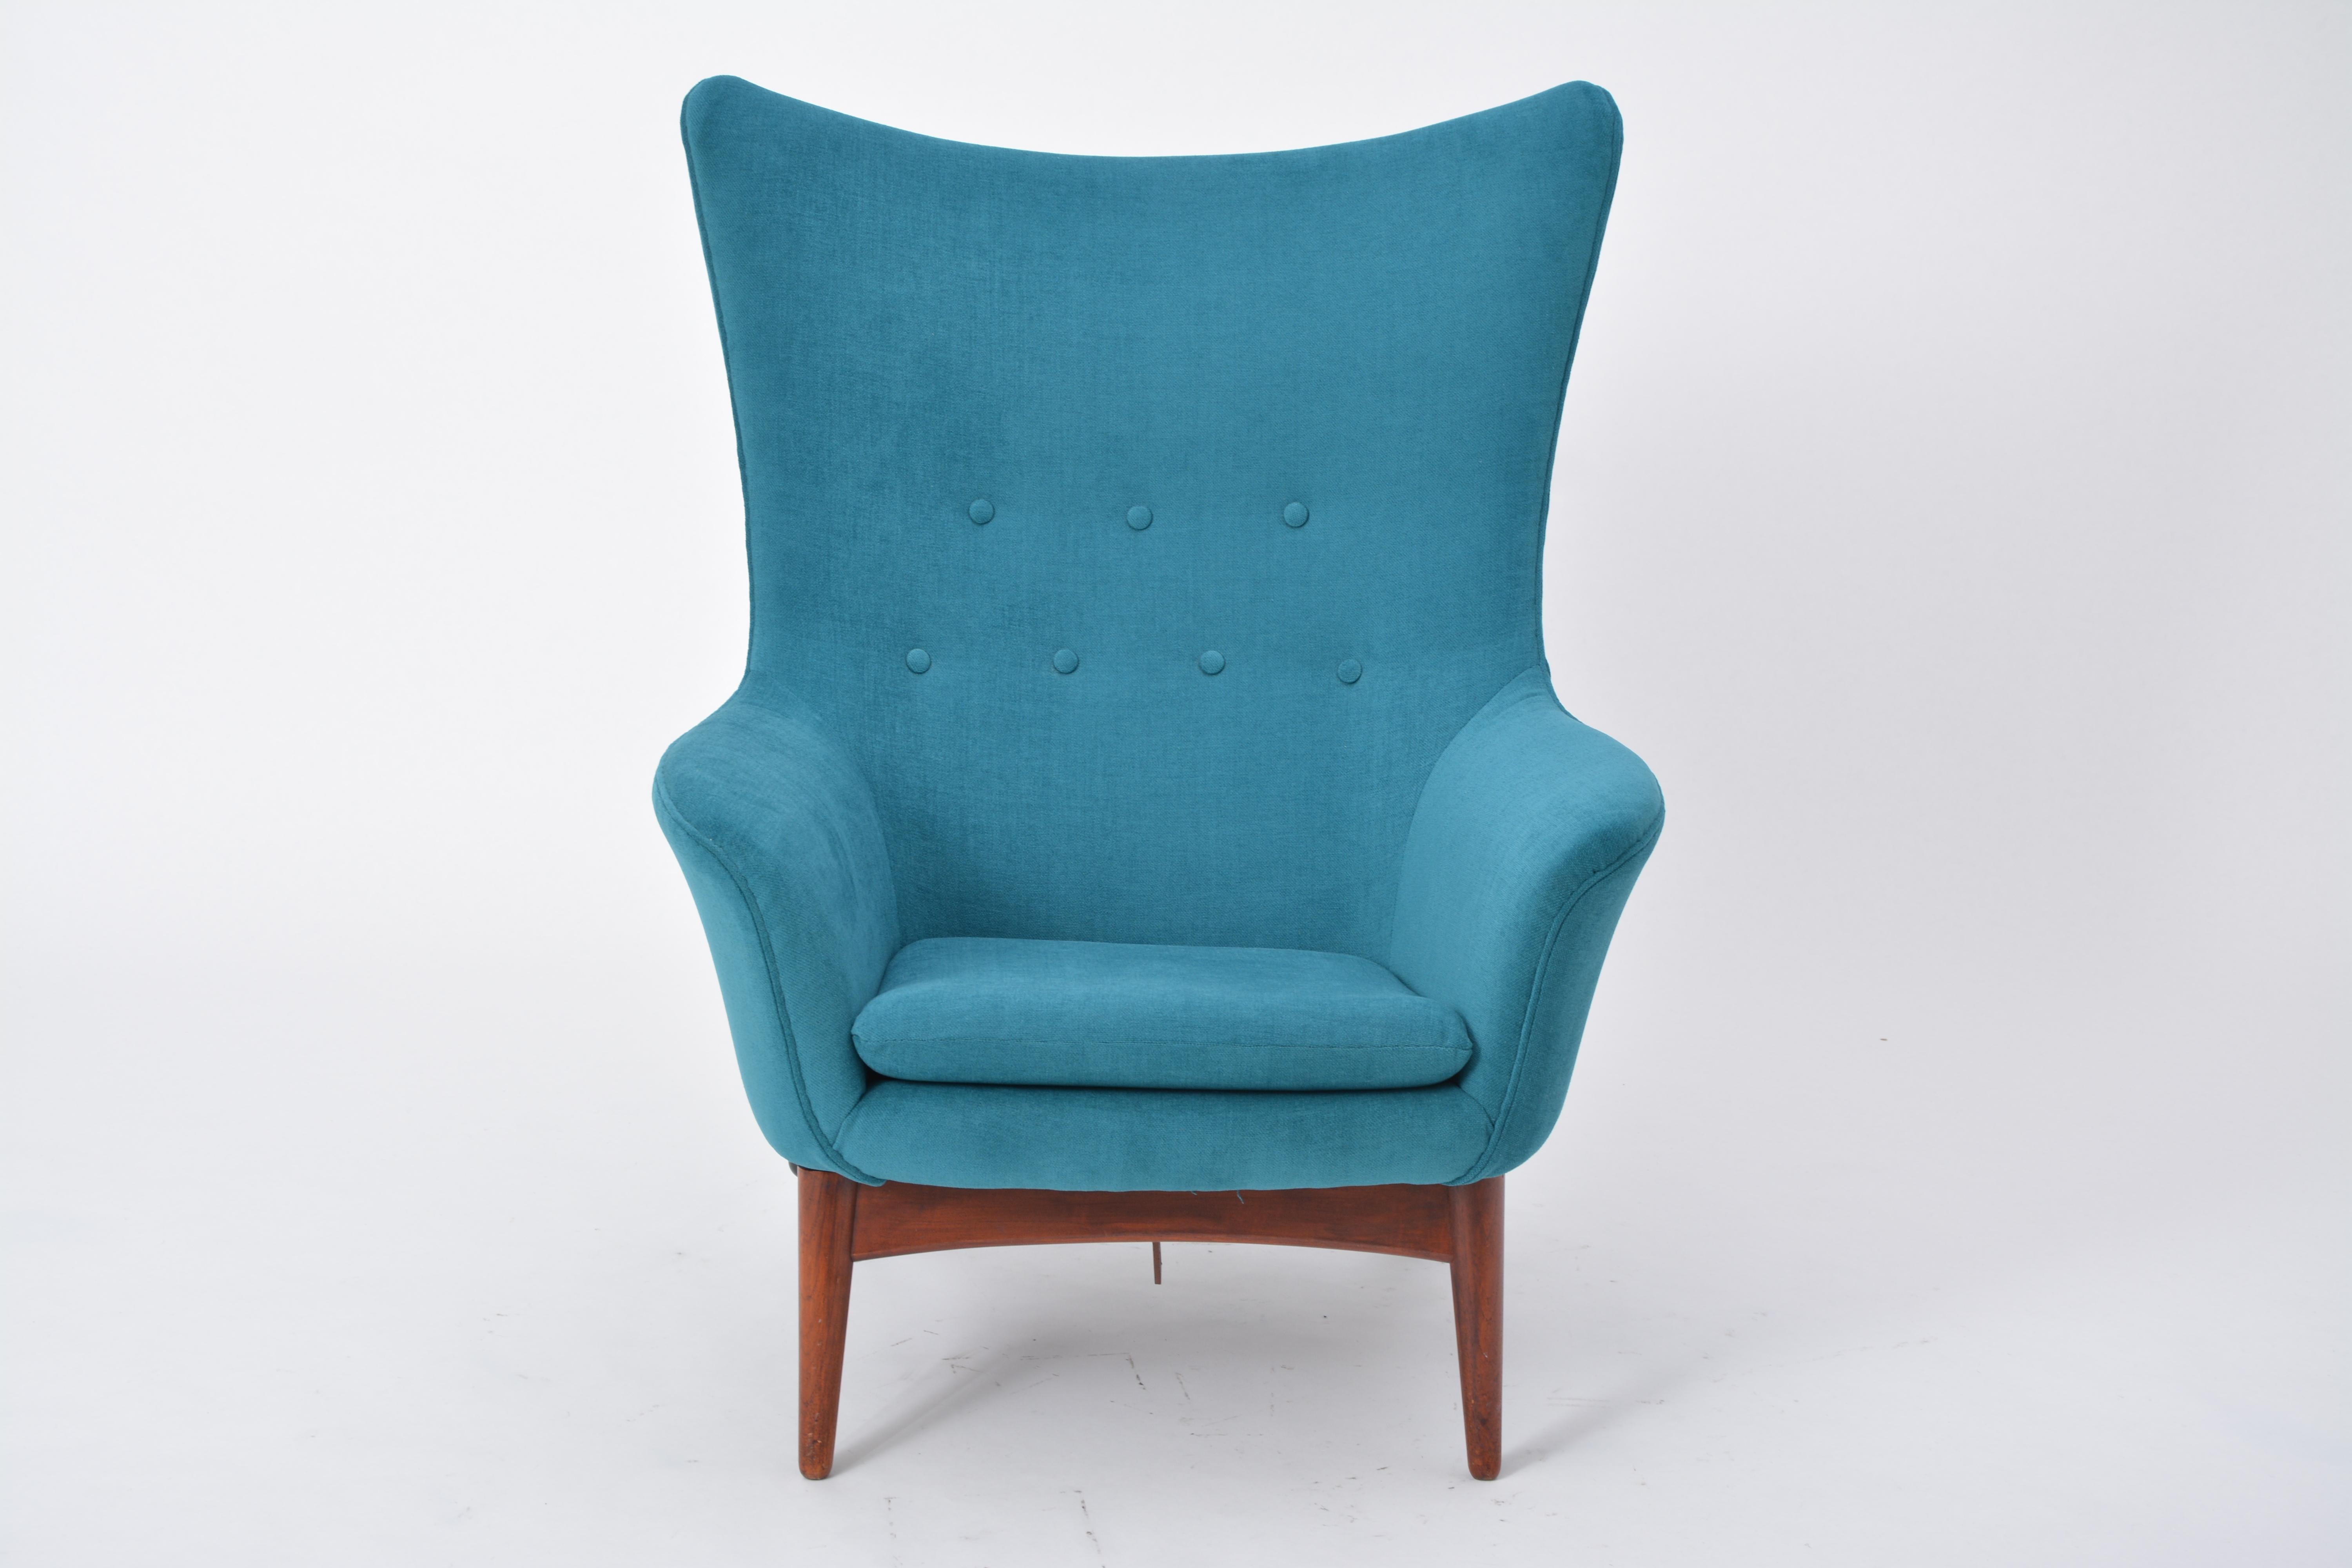 Reupholstered Danish Mid-Century Modern reclining chair designed by Henry W. Klein

The chair has a rounded design with a subtle wing back and has a reclining mechanism adjusted with a knob on the right-hand side of the base. The base is made of